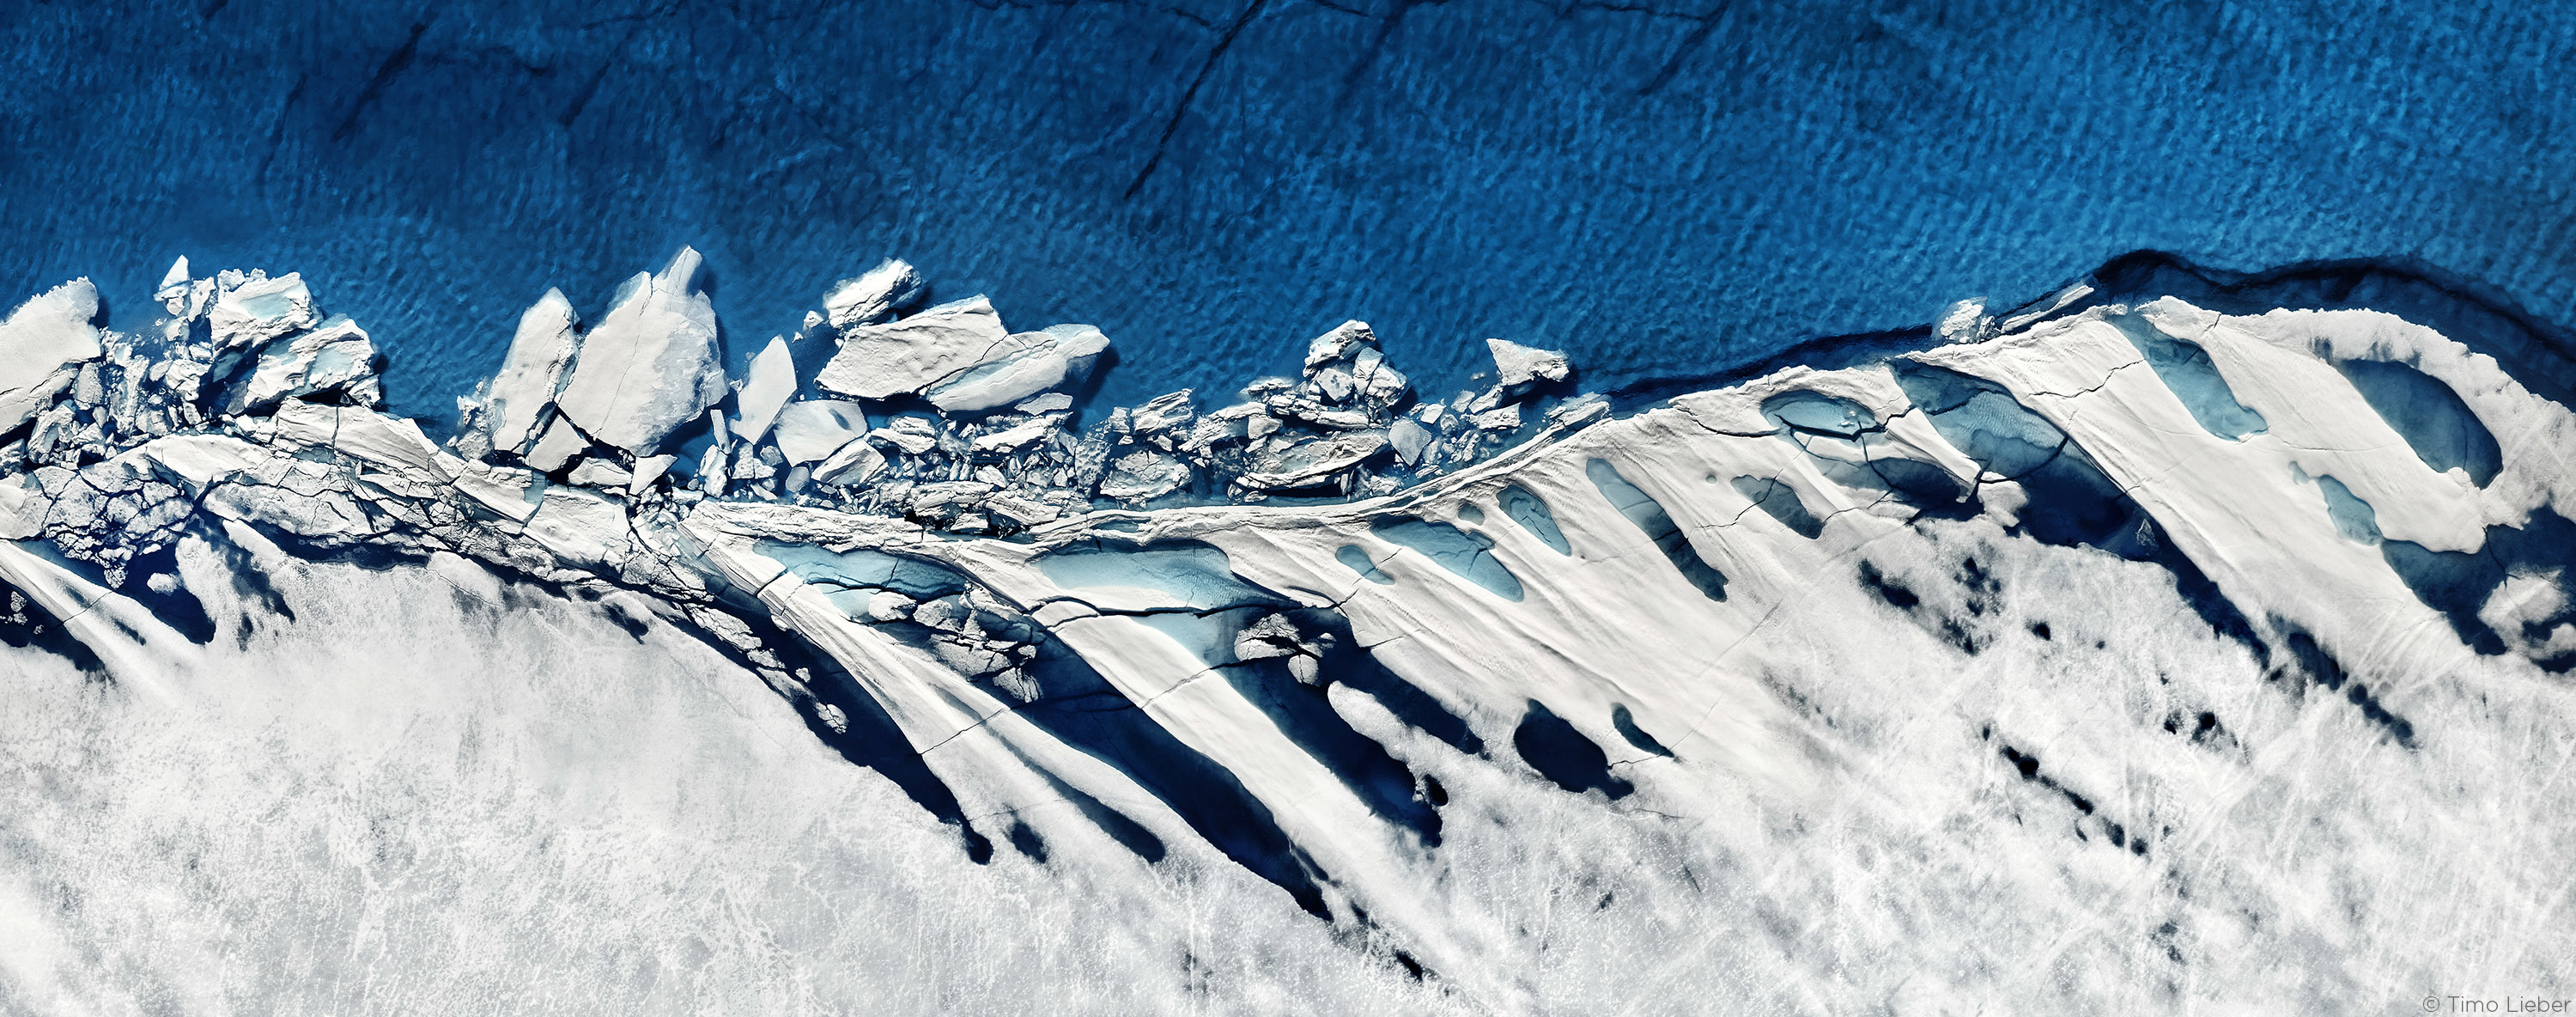 glaciers, Arctic, Iceberg, Snow, Ice, Water, Blue, Birds eye view, Aerial view, Melting Wallpaper